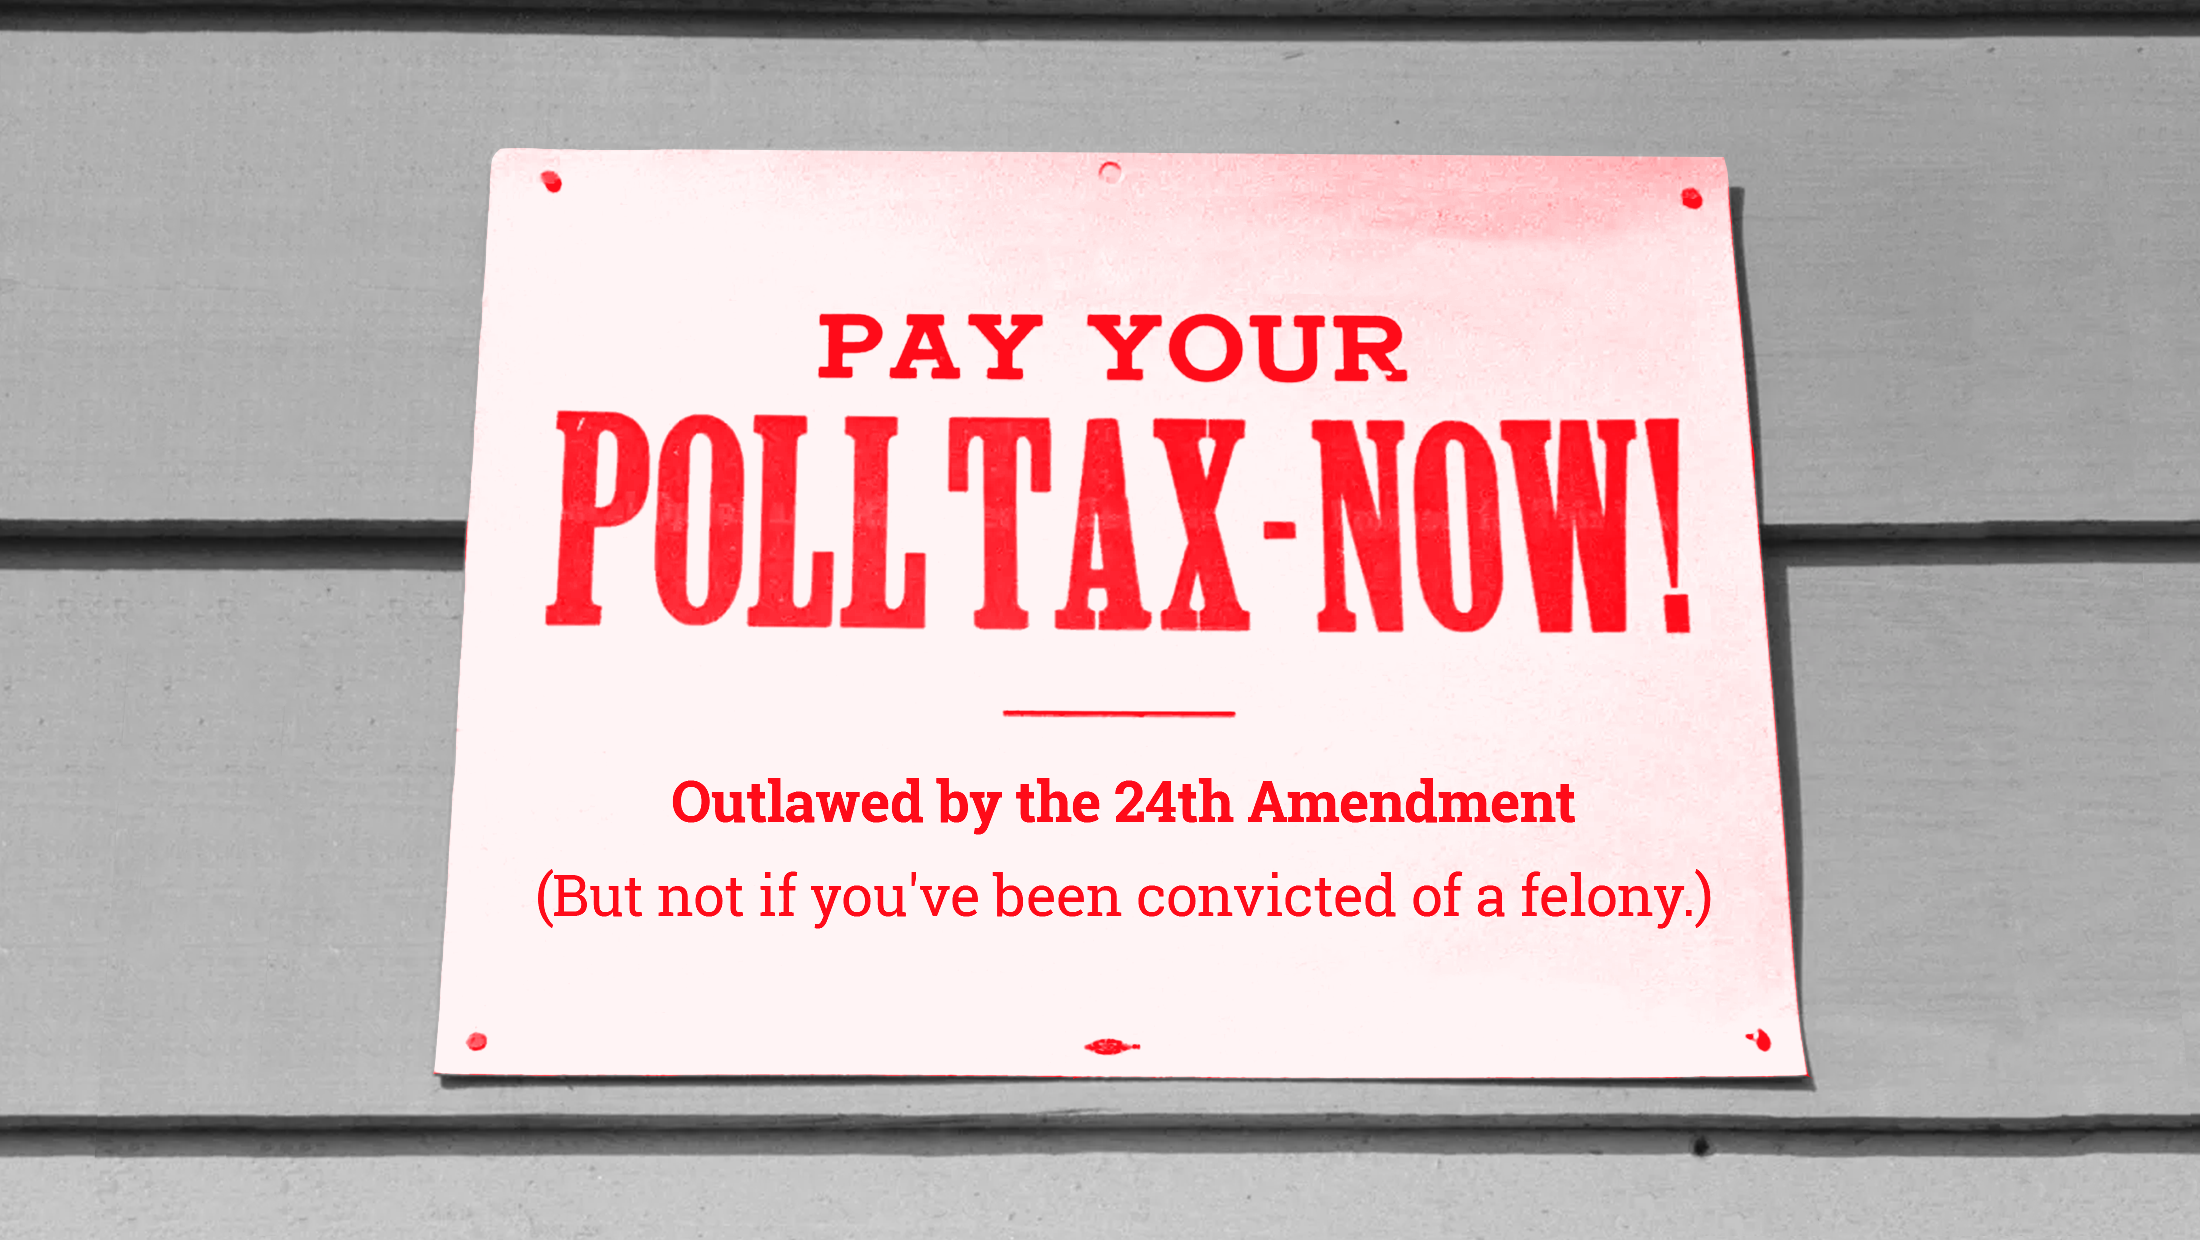 A red-tinted sign on a black and white background that reads: "PAY YOUR POLL TAX NOW! Outlawed by the 24th Amendment (but not if you've been convicted of a felony)"